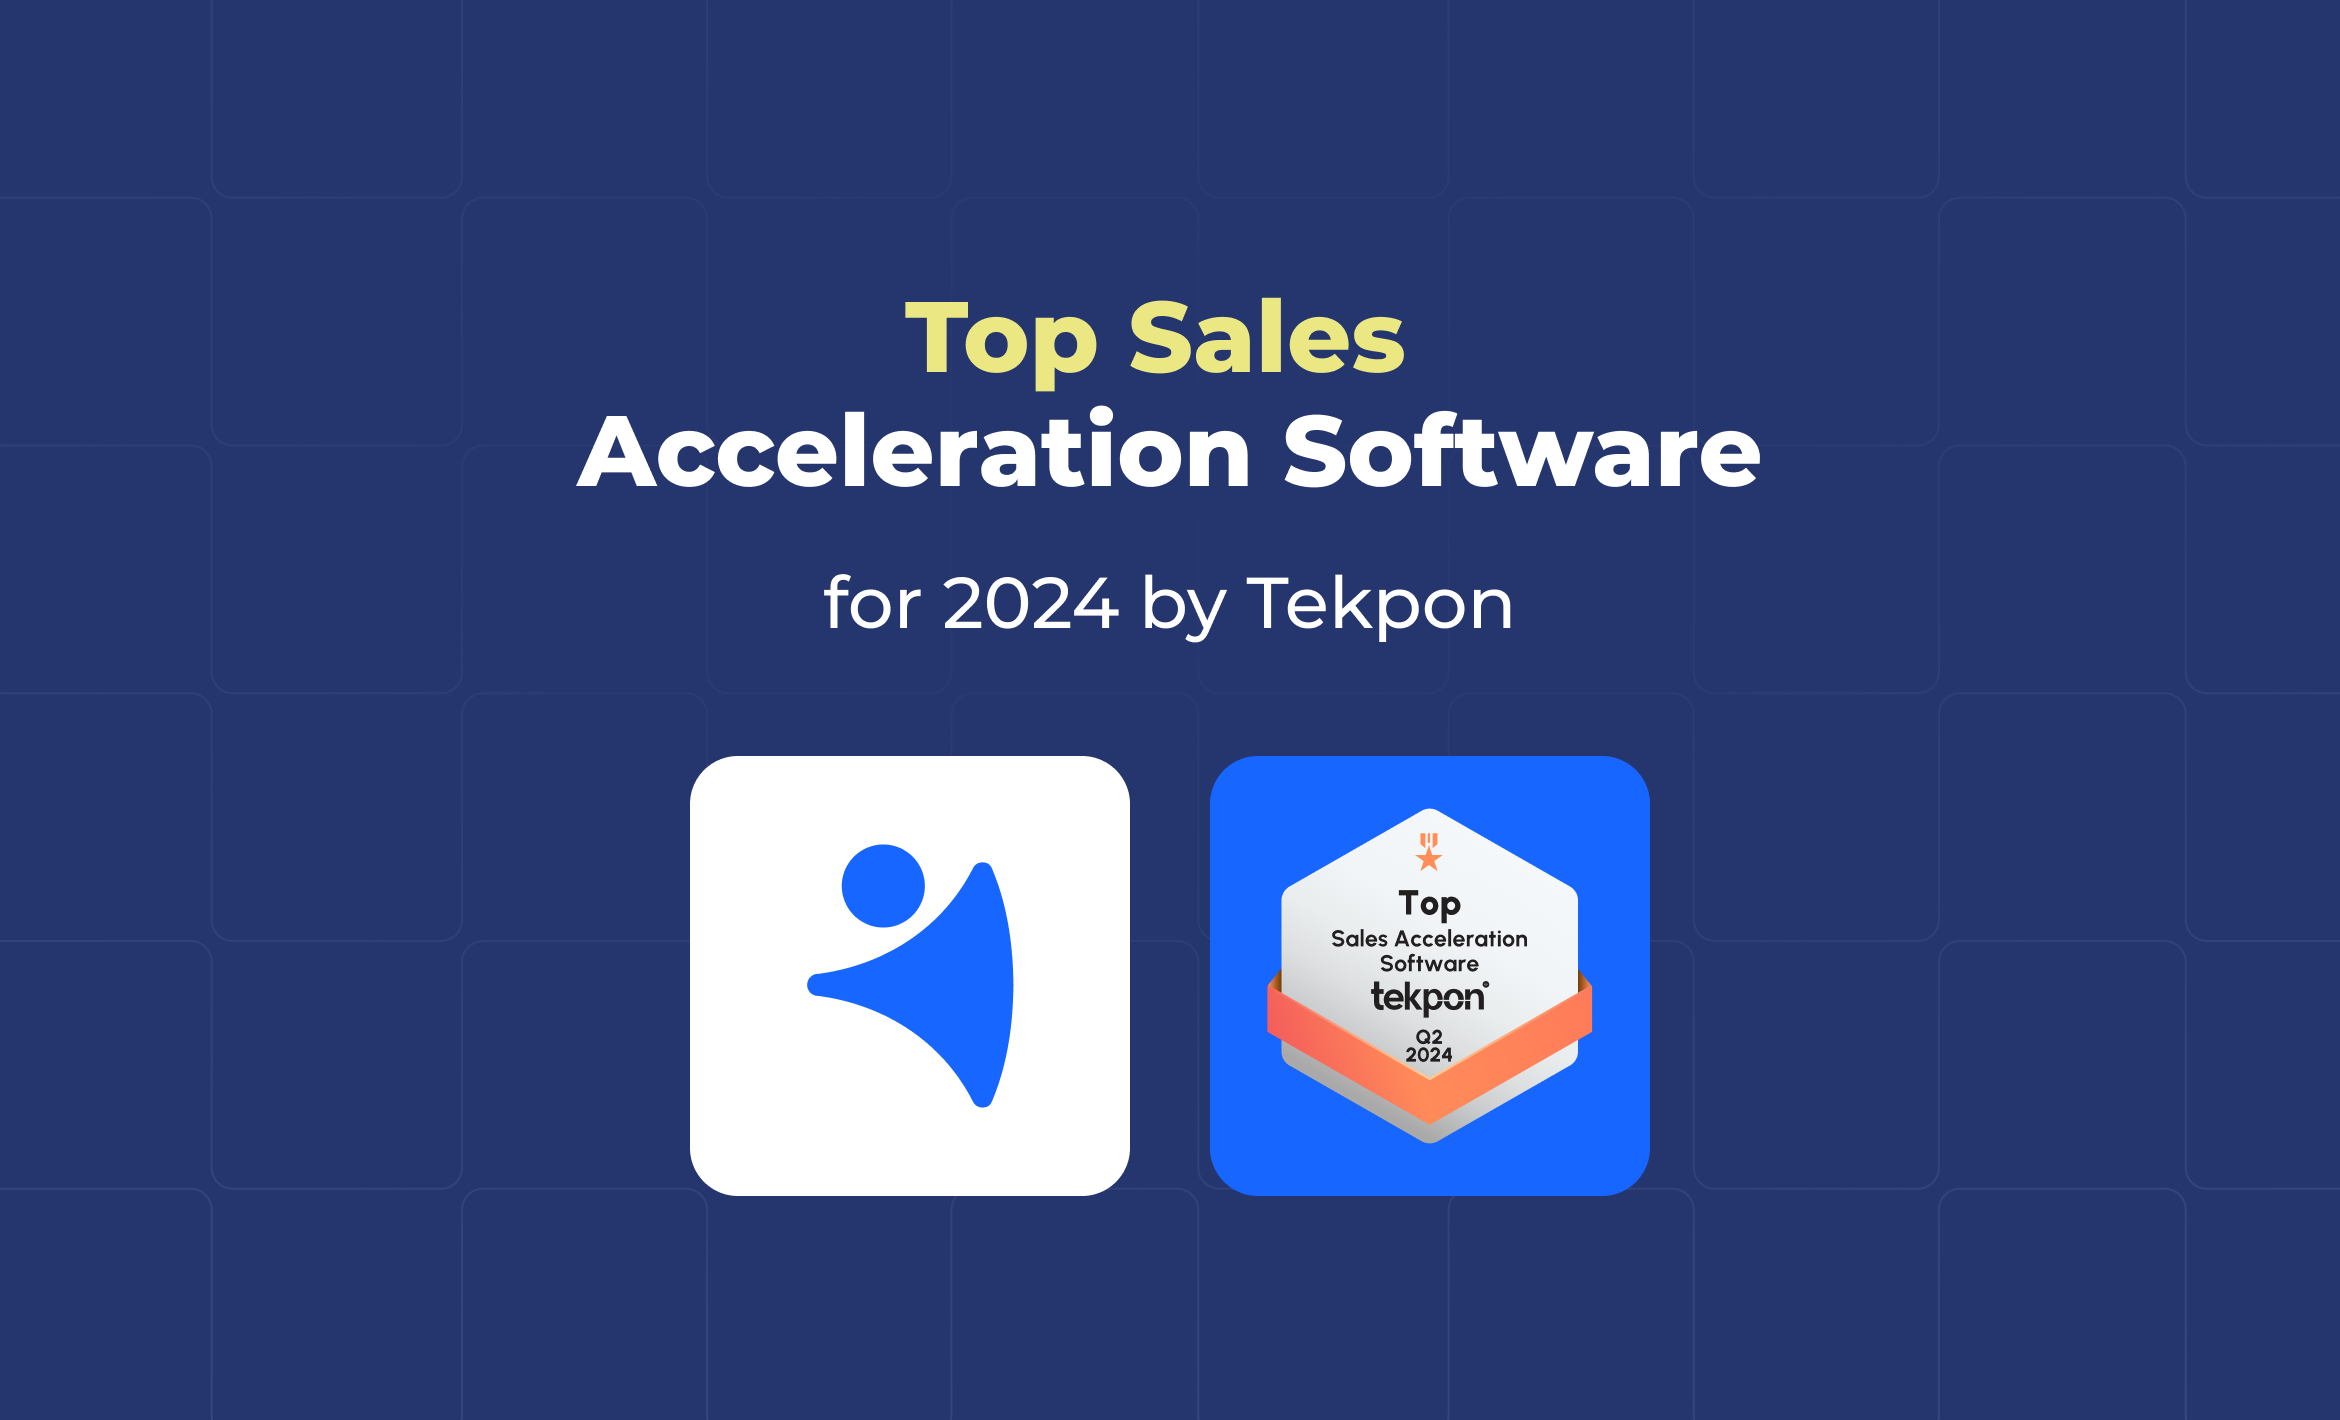 NetHunt CRM announced as a part of  Tekpon’s Top Sales Acceleration Software